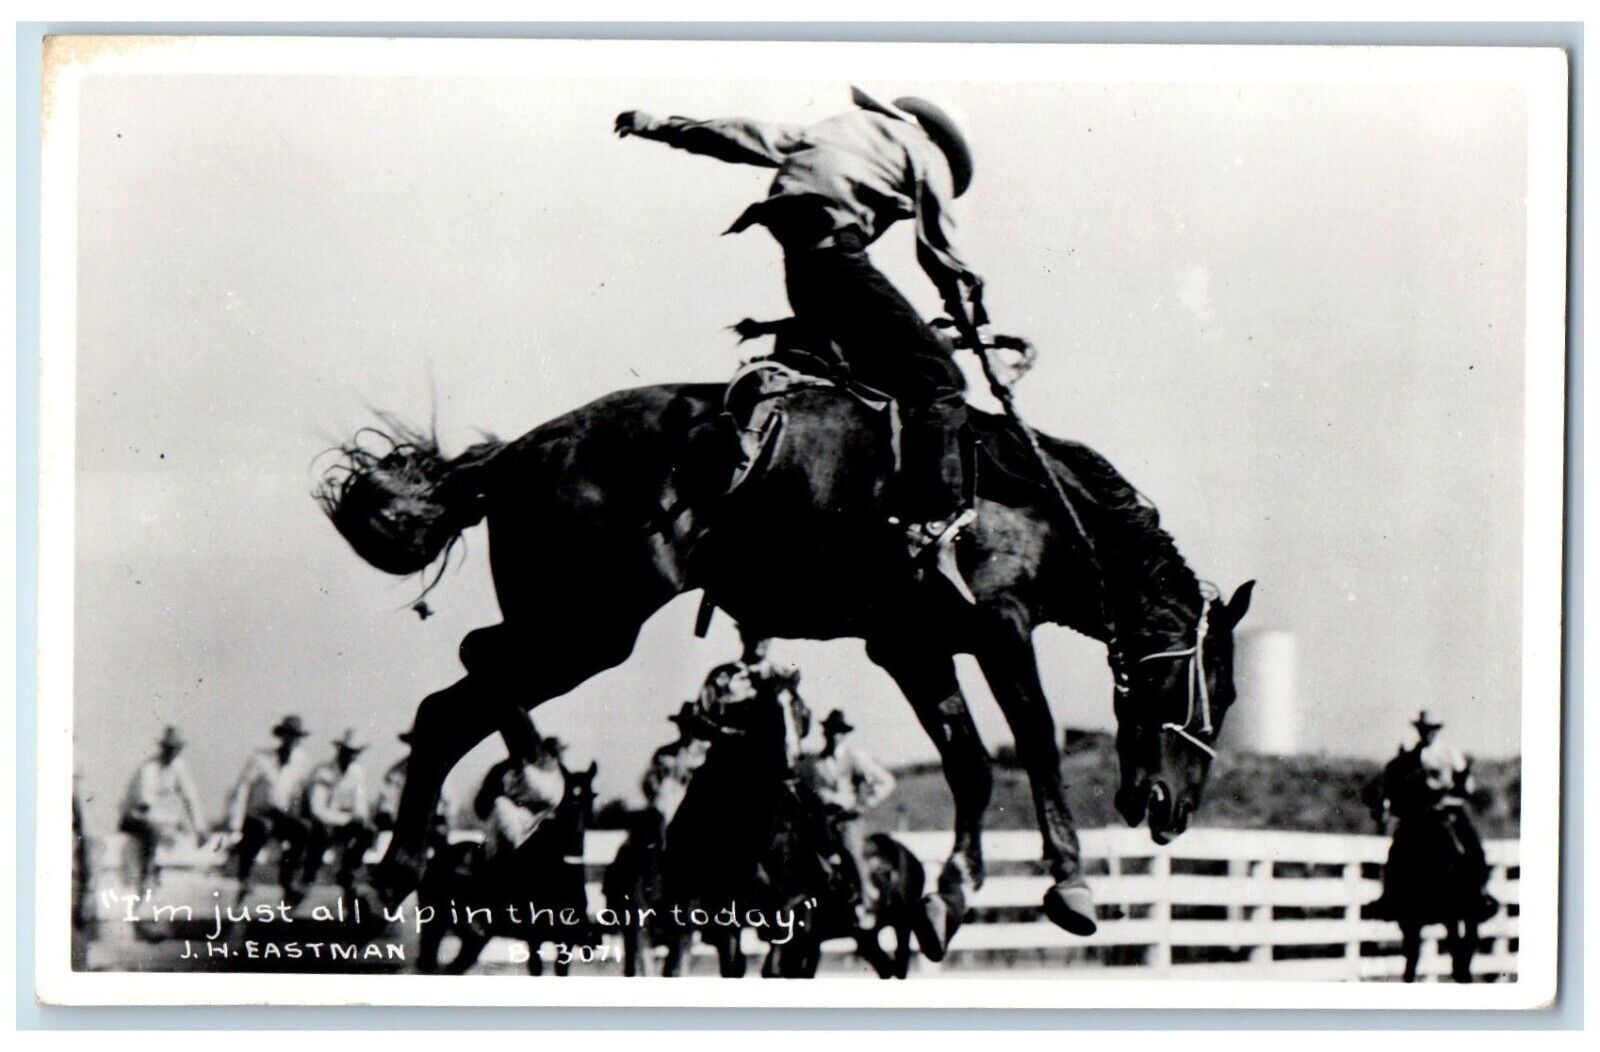 Rodeo Postcard RPPC Photo I'm Just All Up In The Air Today Eastman c1940's